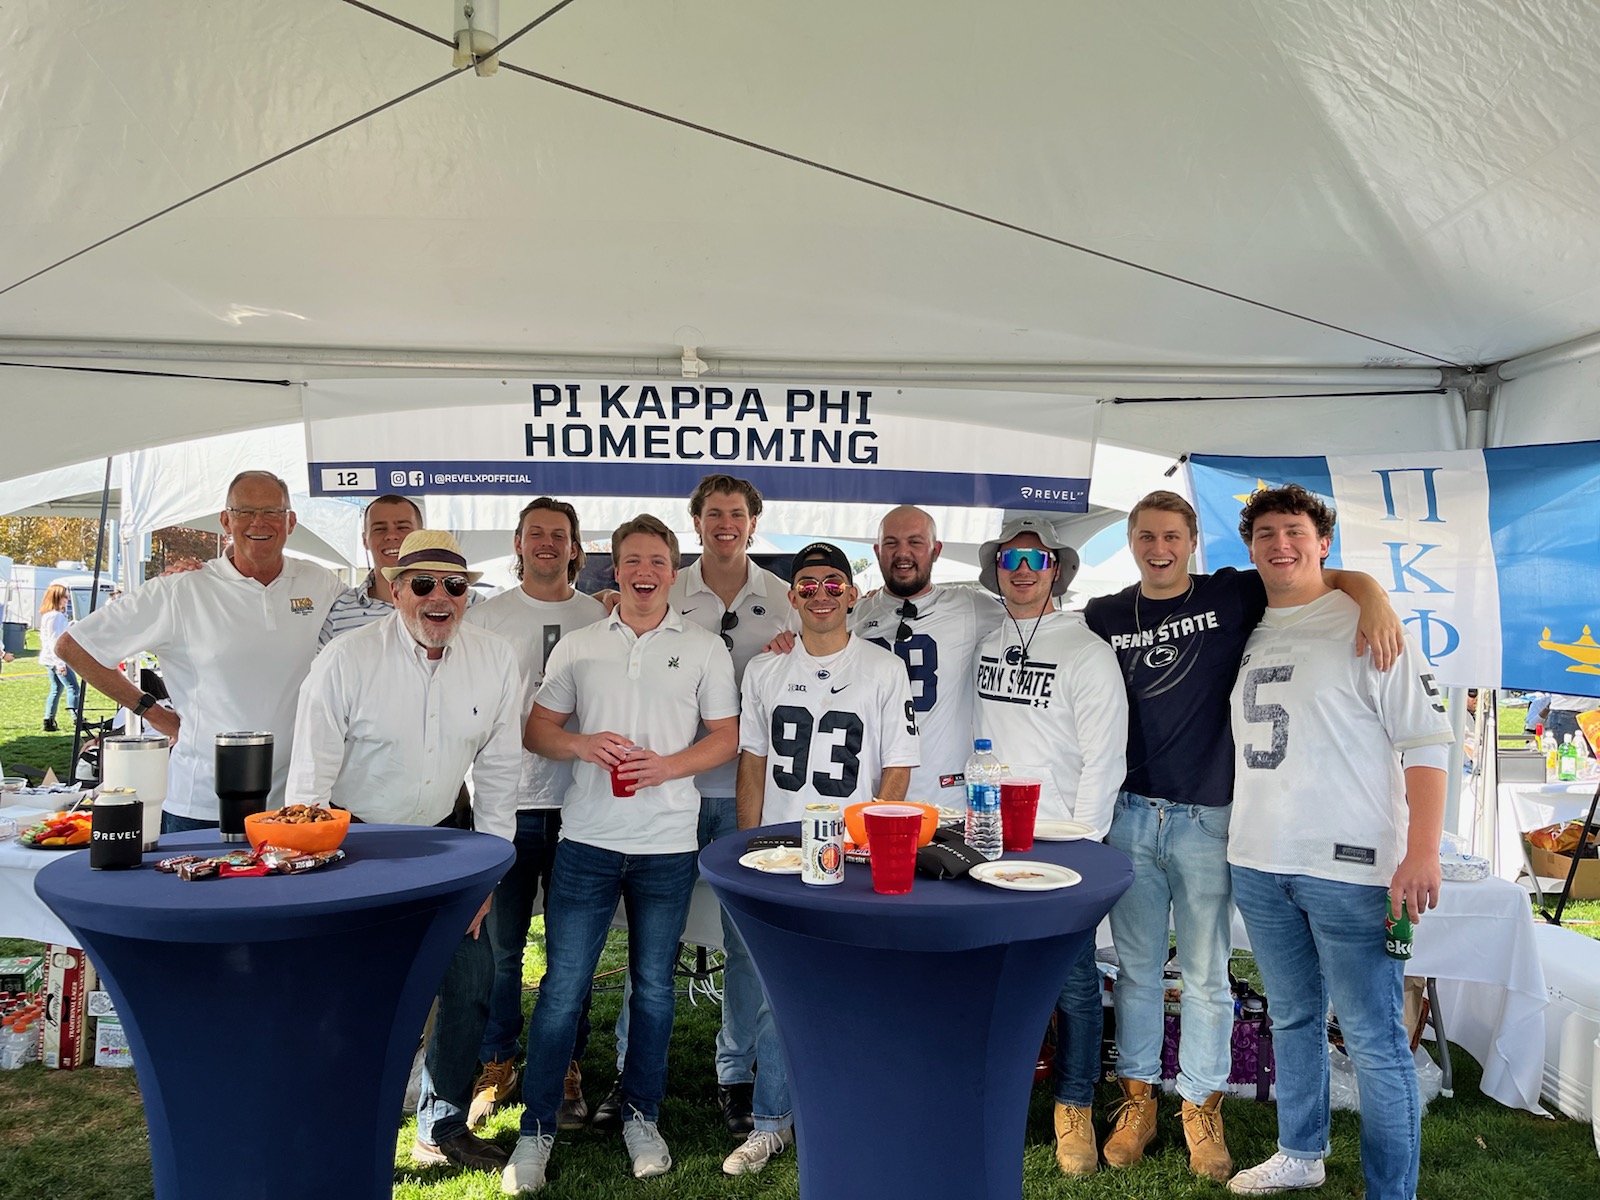 Did you come up to tailgate for the Blue-White game? We want to know!